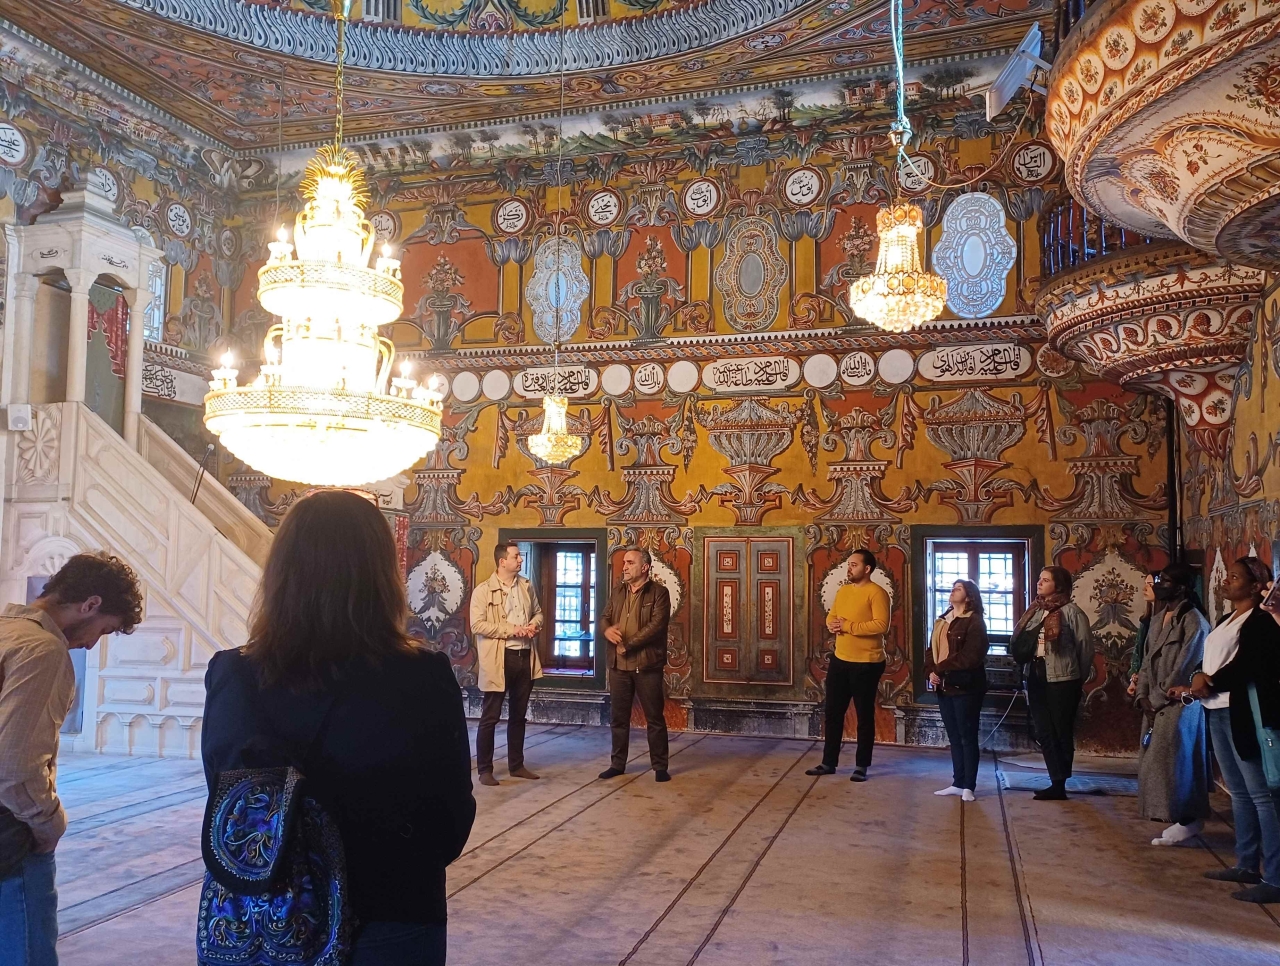 touring the painted mosque